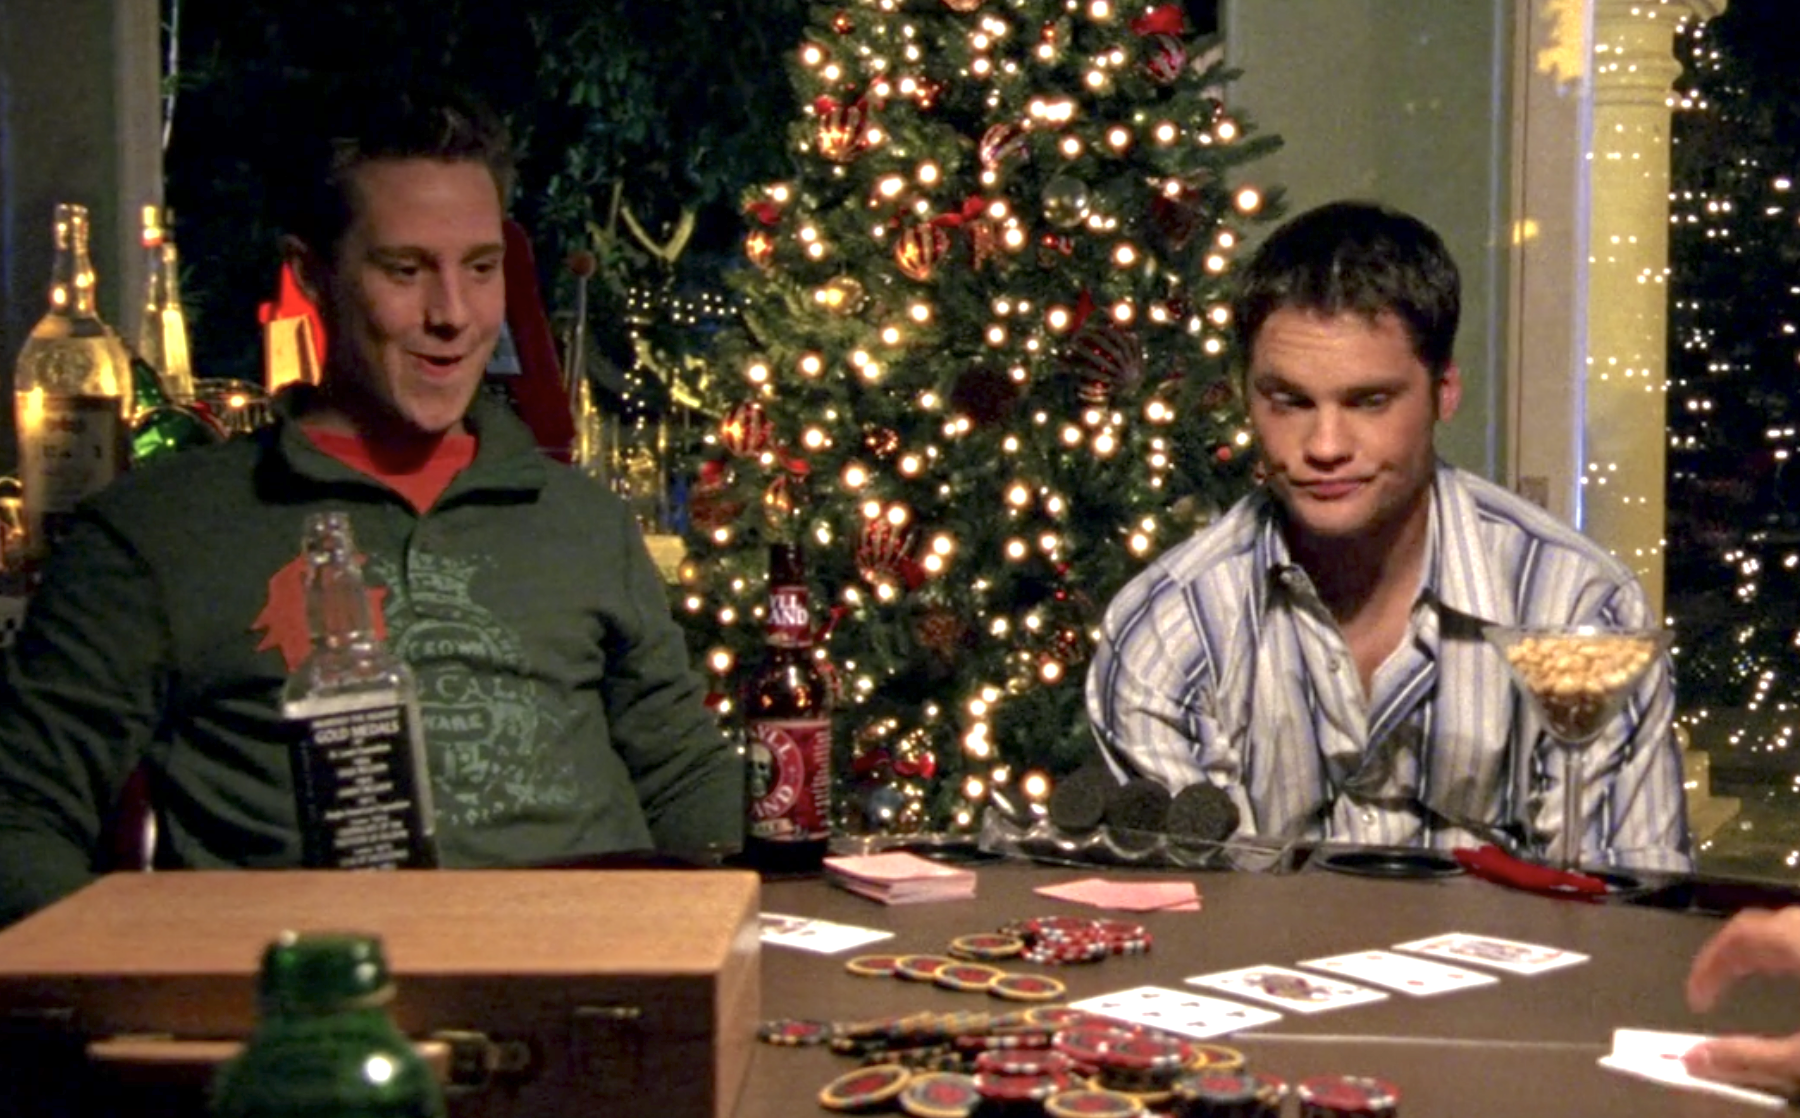 Screenshot from Veronica Mars season one, episode 10. Logan, in a green collared shirt and orange undershirt is laughing and Duncan, in a blue striped collared shirt is looking drunk. They're at a poker table and there's a decorated Christmas tree behind them. The table is spread with poker chips and cards.